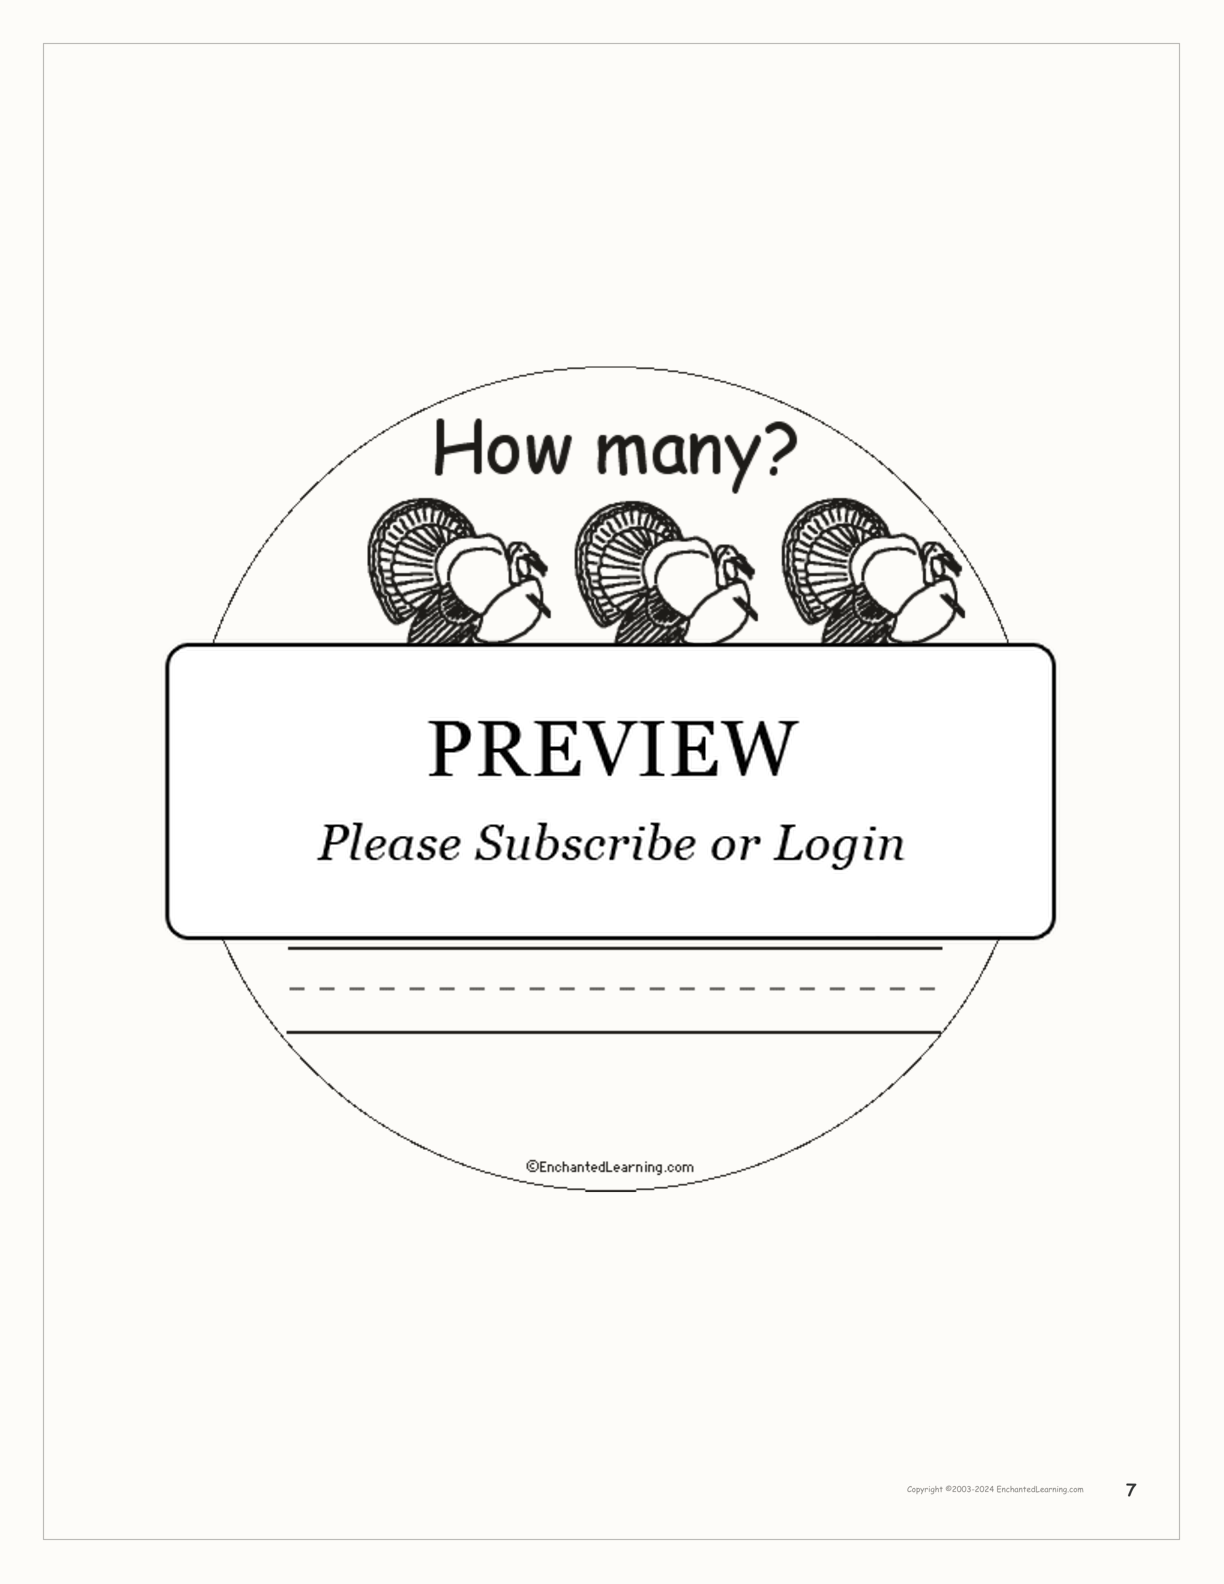 How Many Farm Animals? Book for Early Readers interactive printout page 7